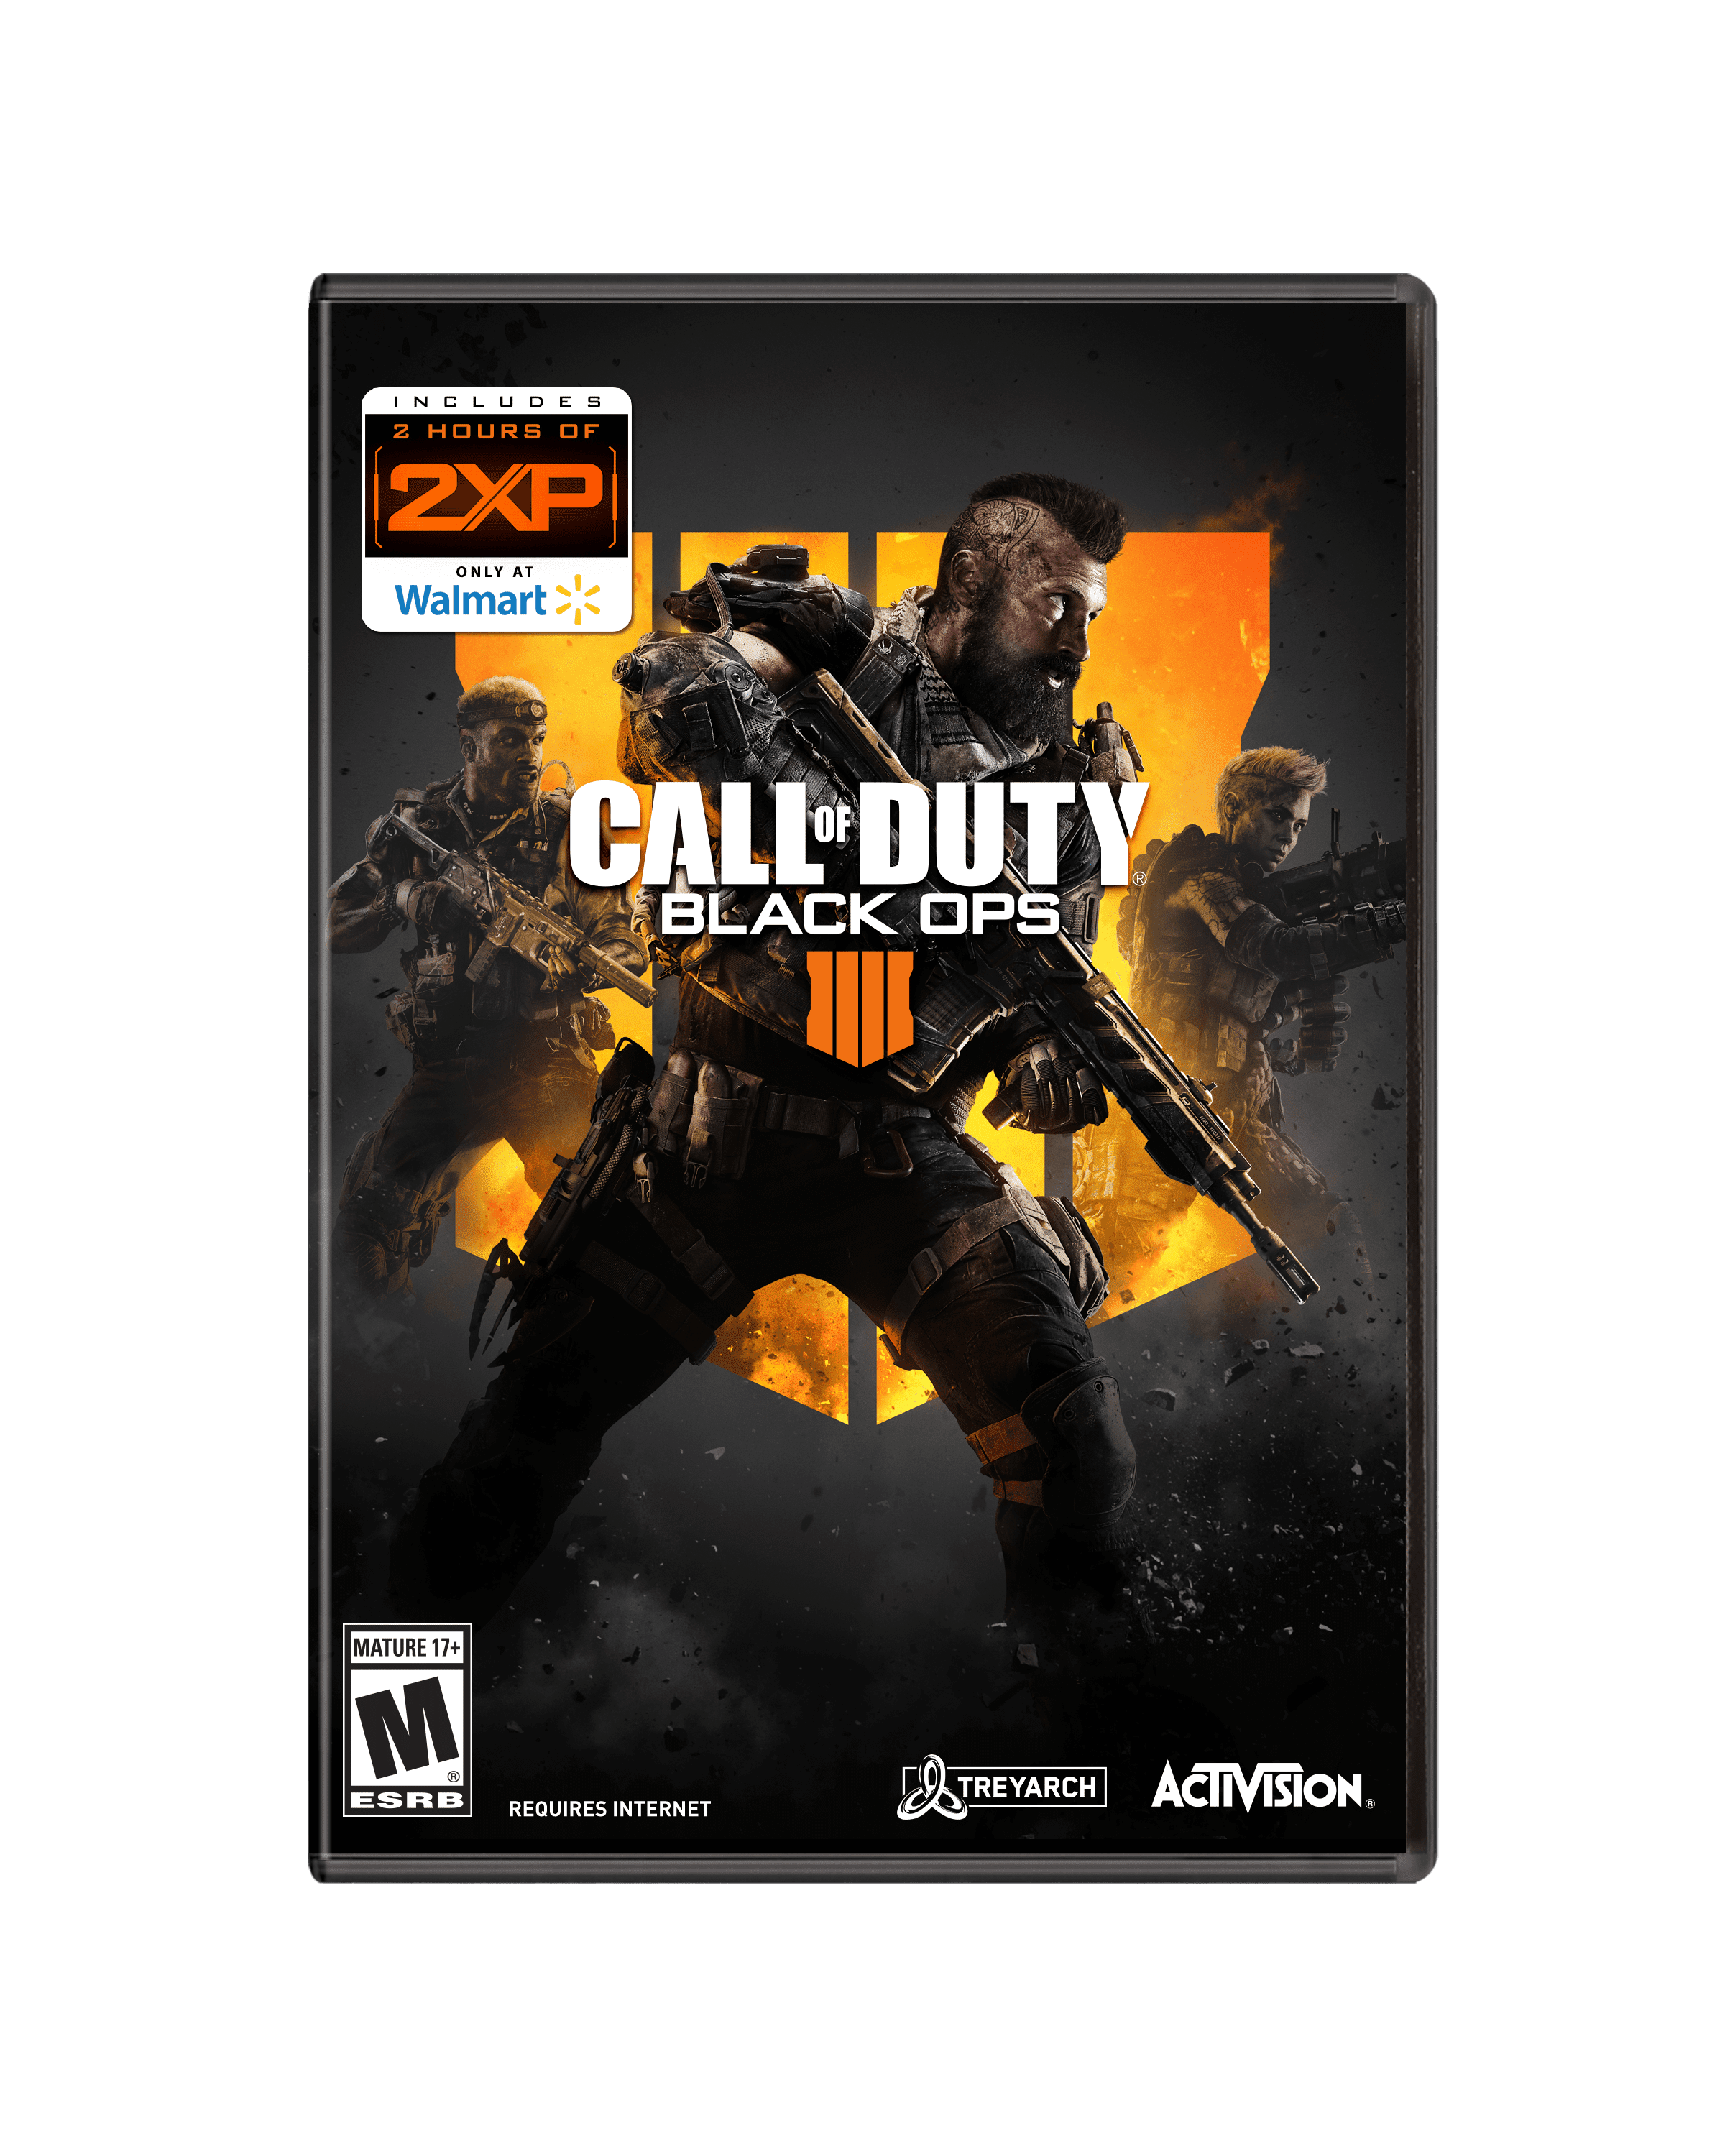 Call of Duty Black Ops 2 (PC) Key cheap - Price of $22.99 for Steam